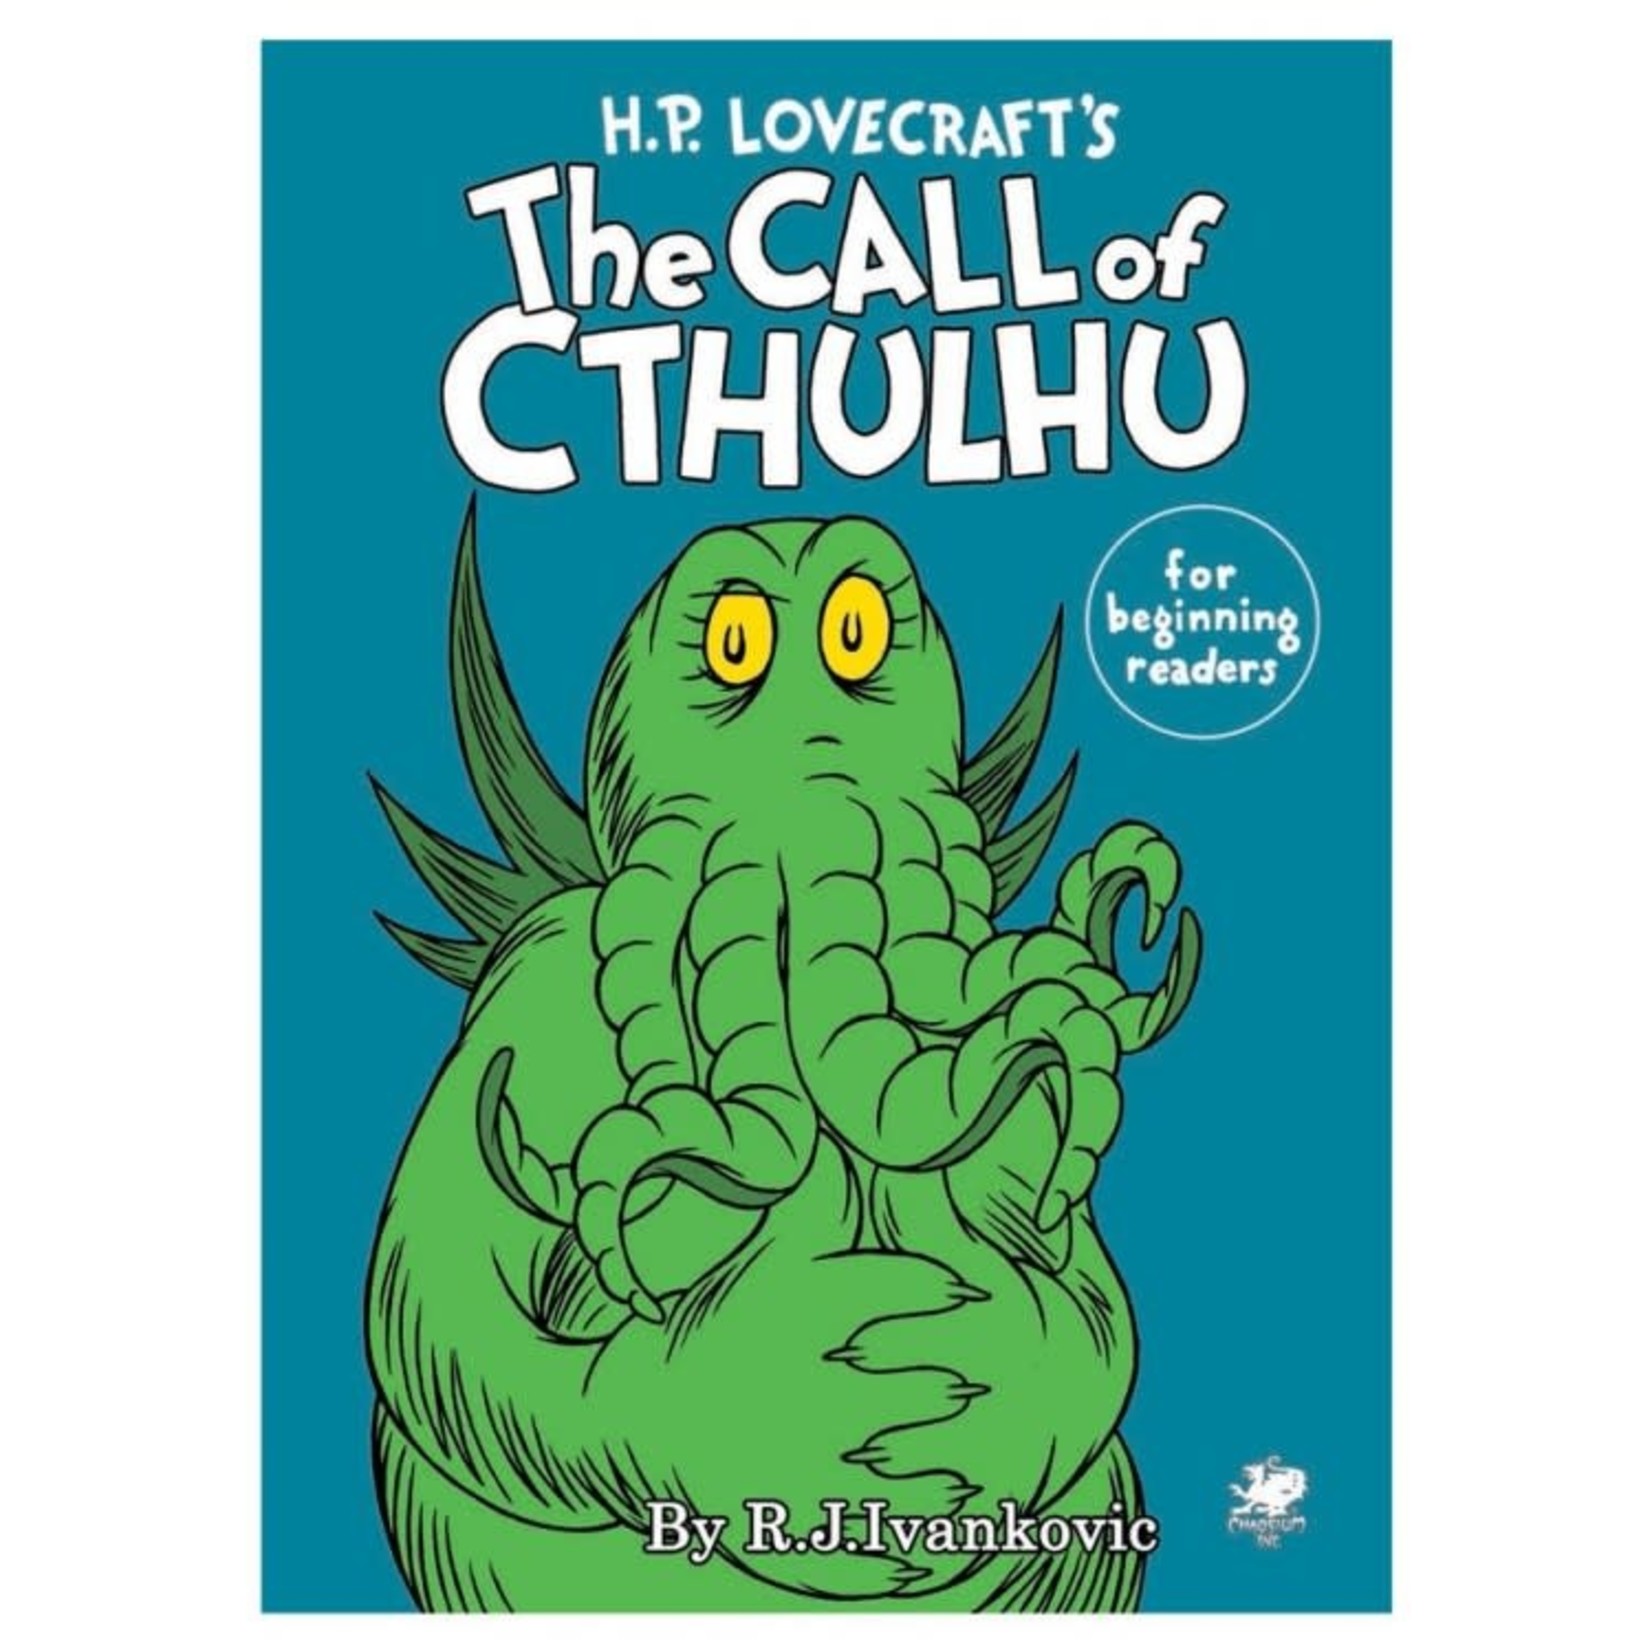 Chaosium Call of Cthulhu for Beginning Readers HC